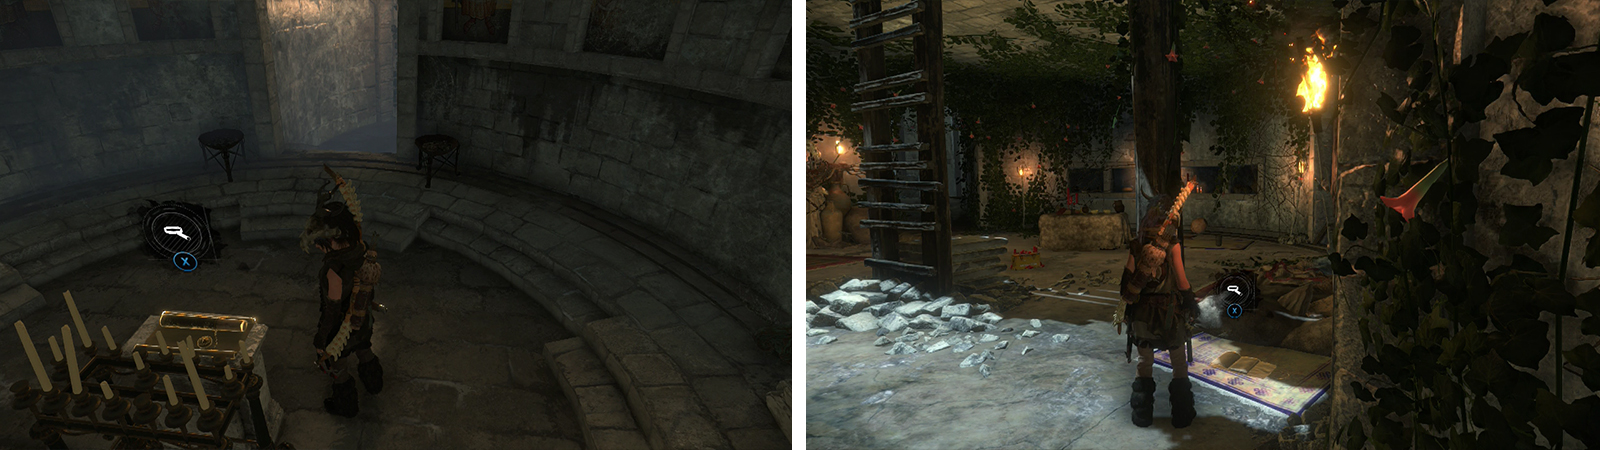 Document 15 is in a side tunnel accessible from the water (left). Document 16 (right) and Relic 01 are inside the temple in the room with the ladder.